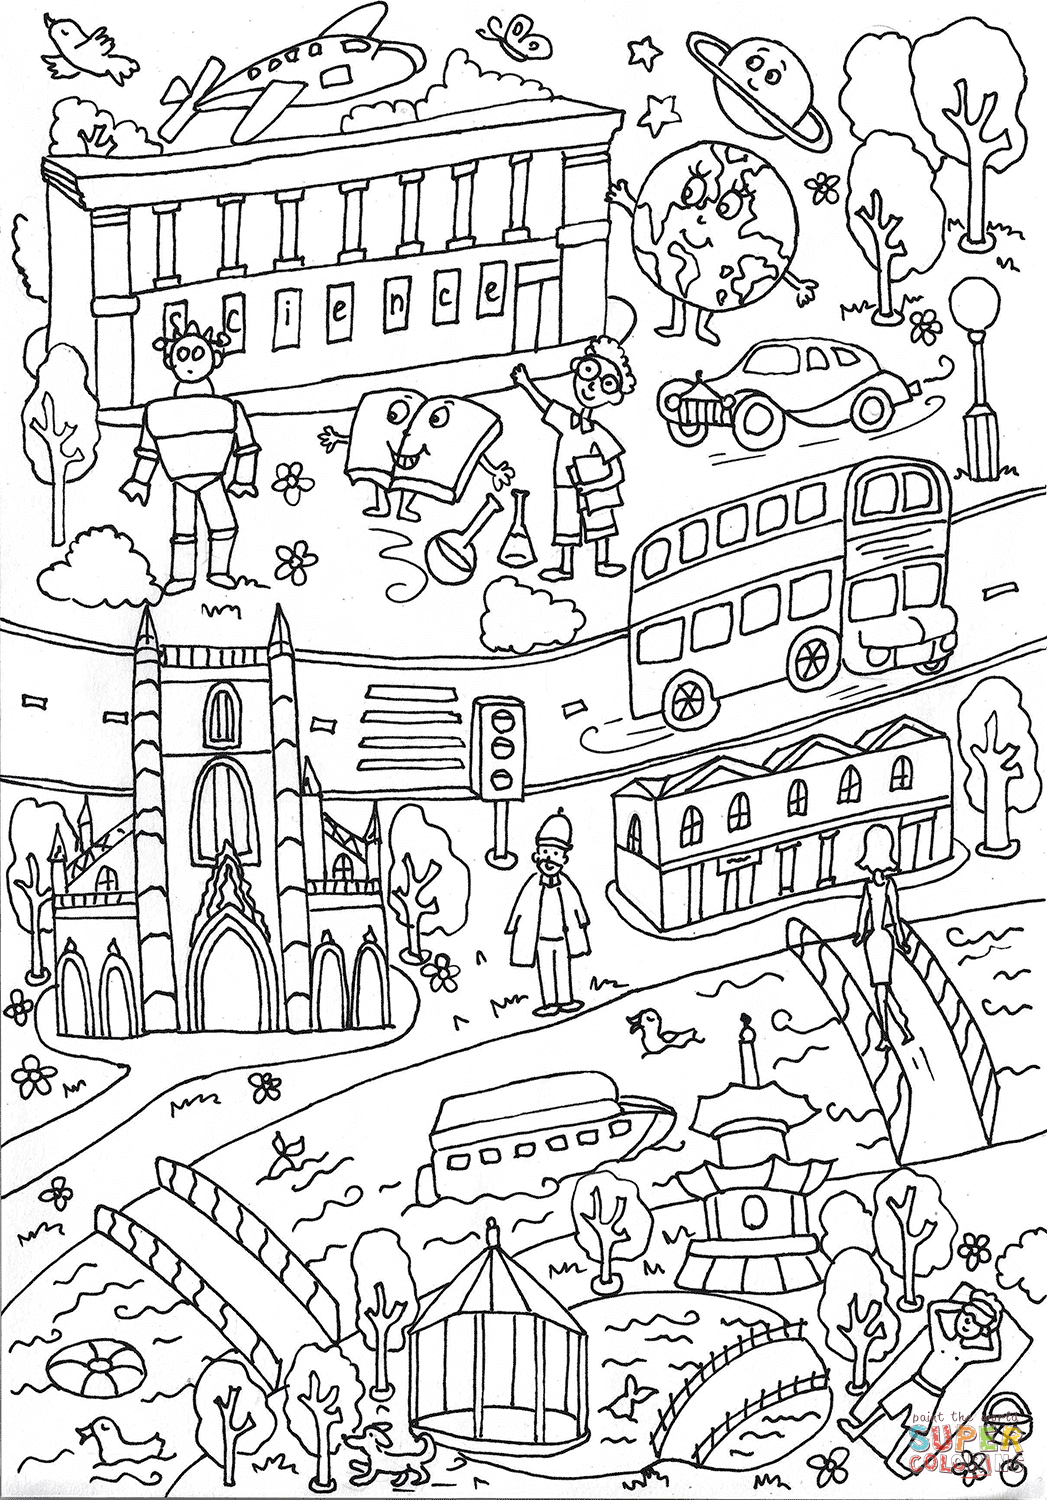 South Park Coloring Page Science Museum And Battersea Park Coloring Page Free Printable